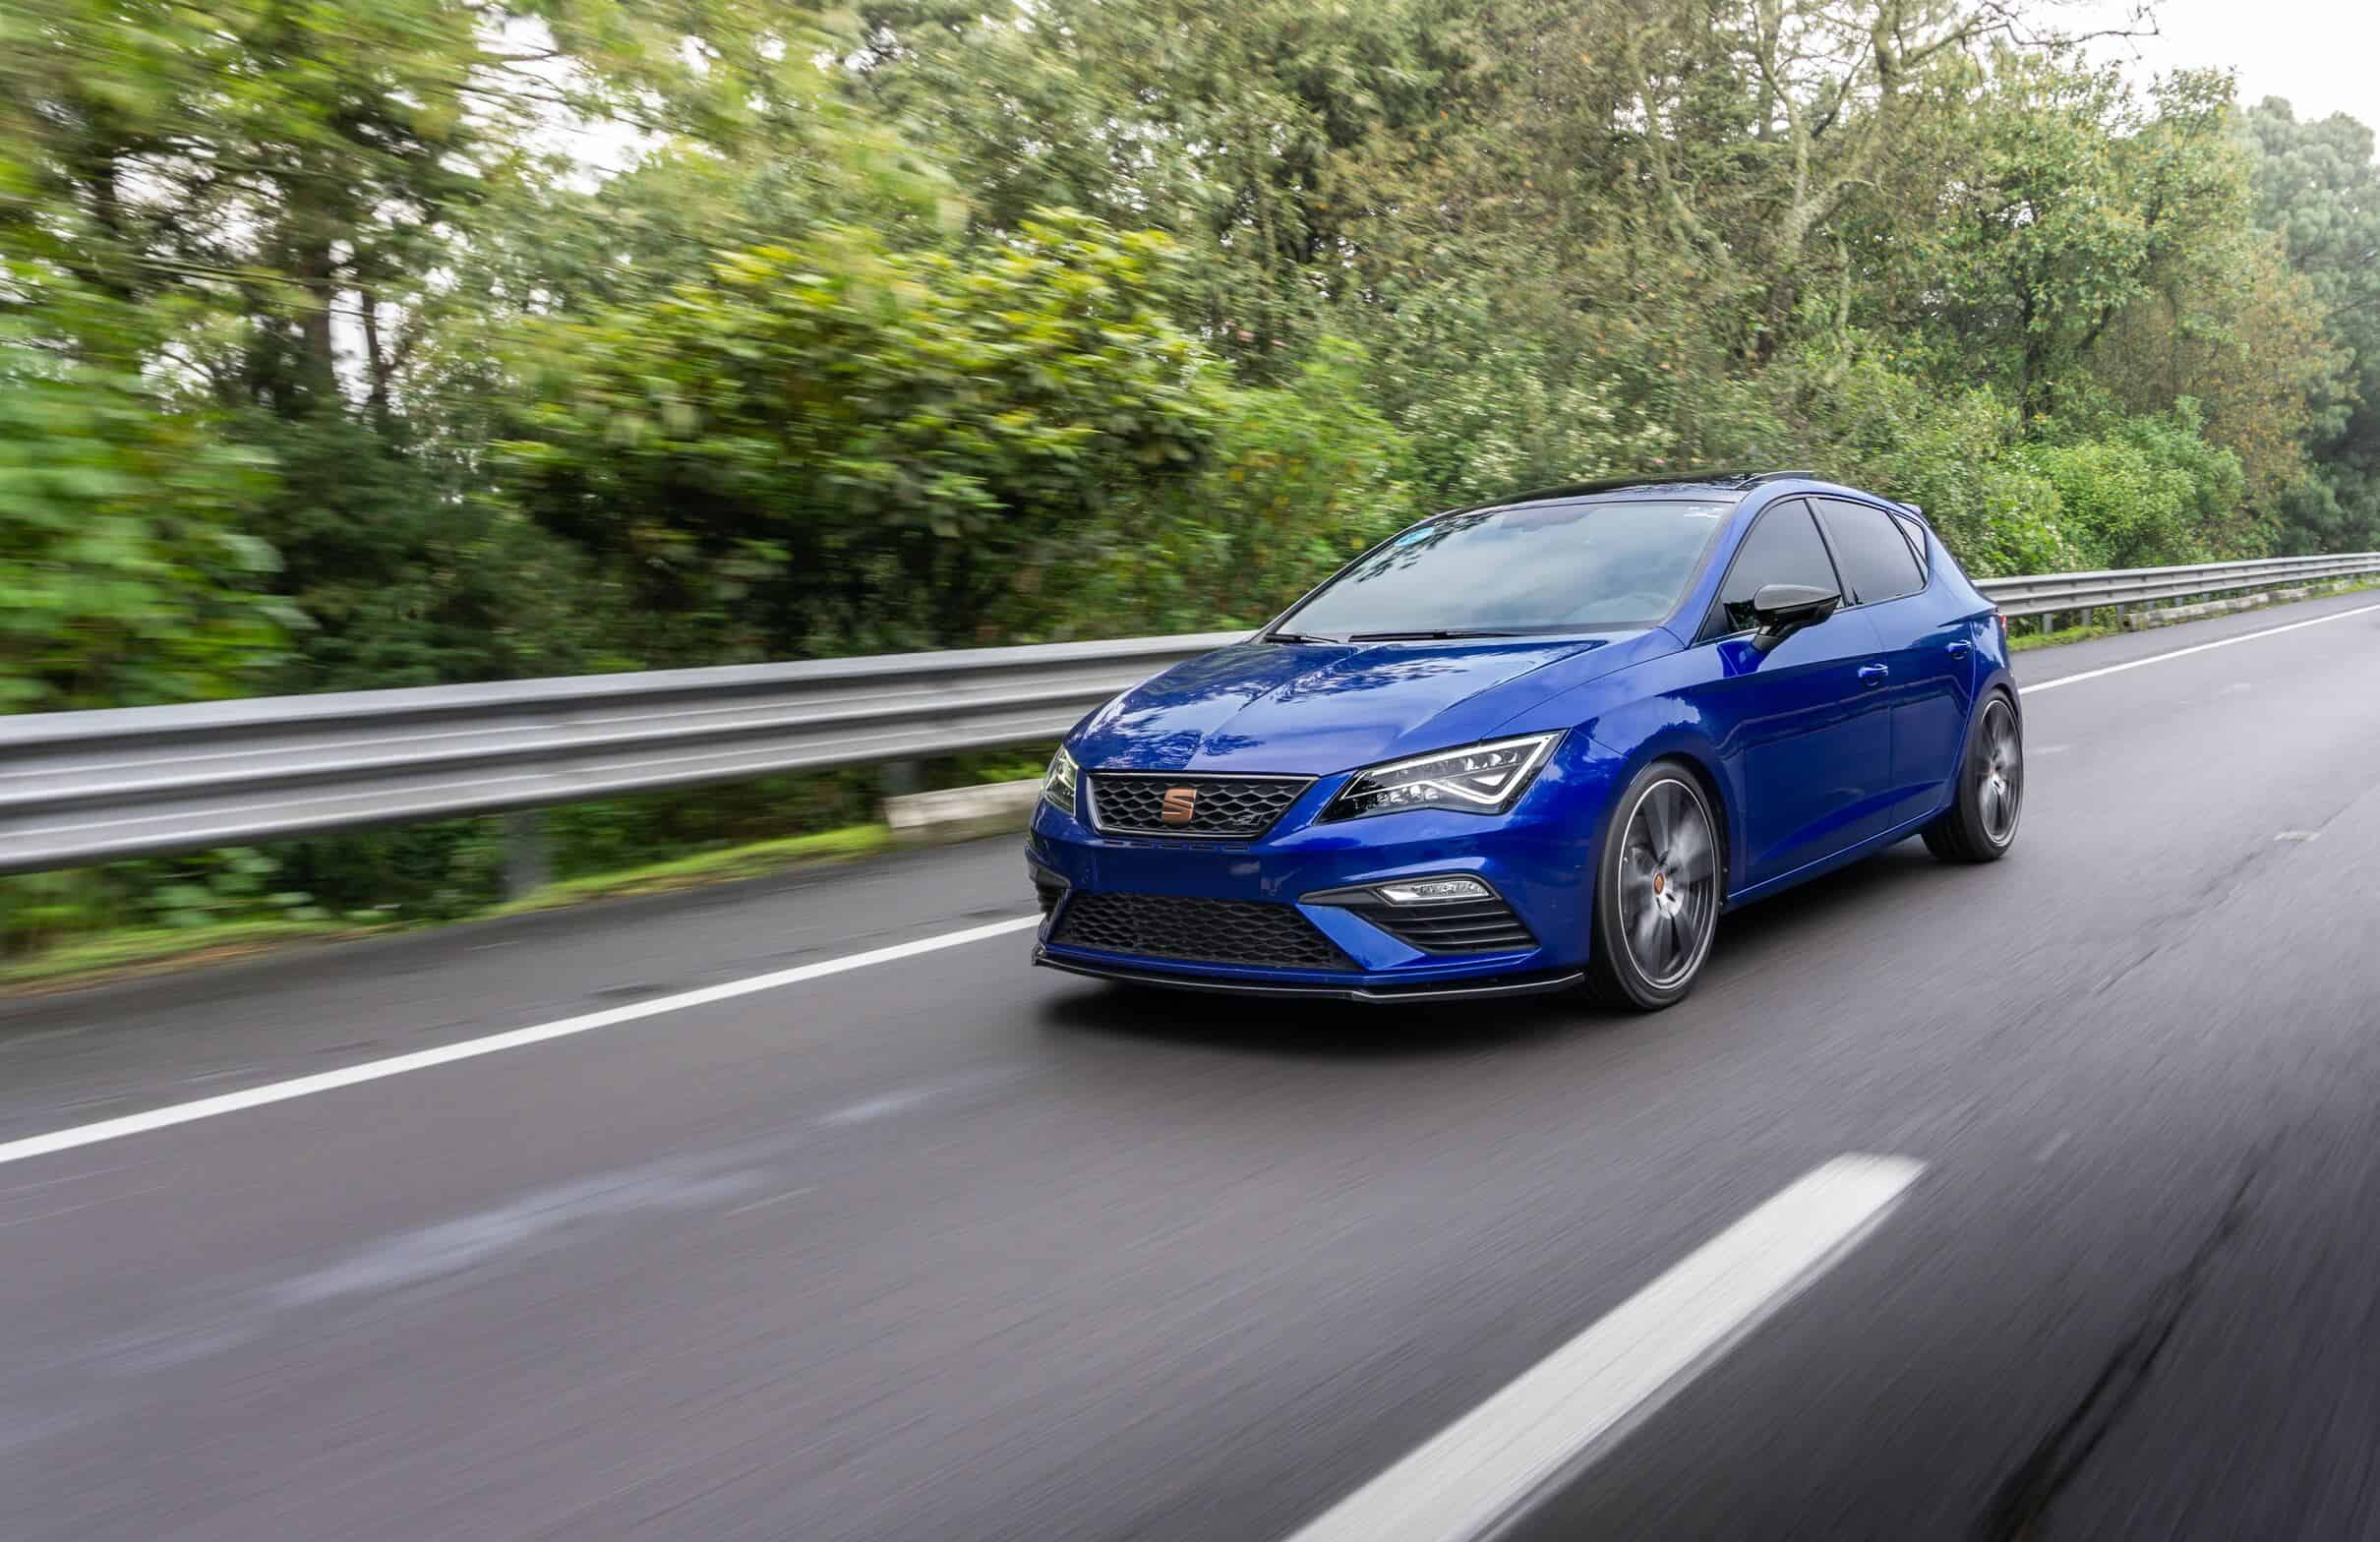 SEAT LEON vs SEAT Ibiza - Which is Better?